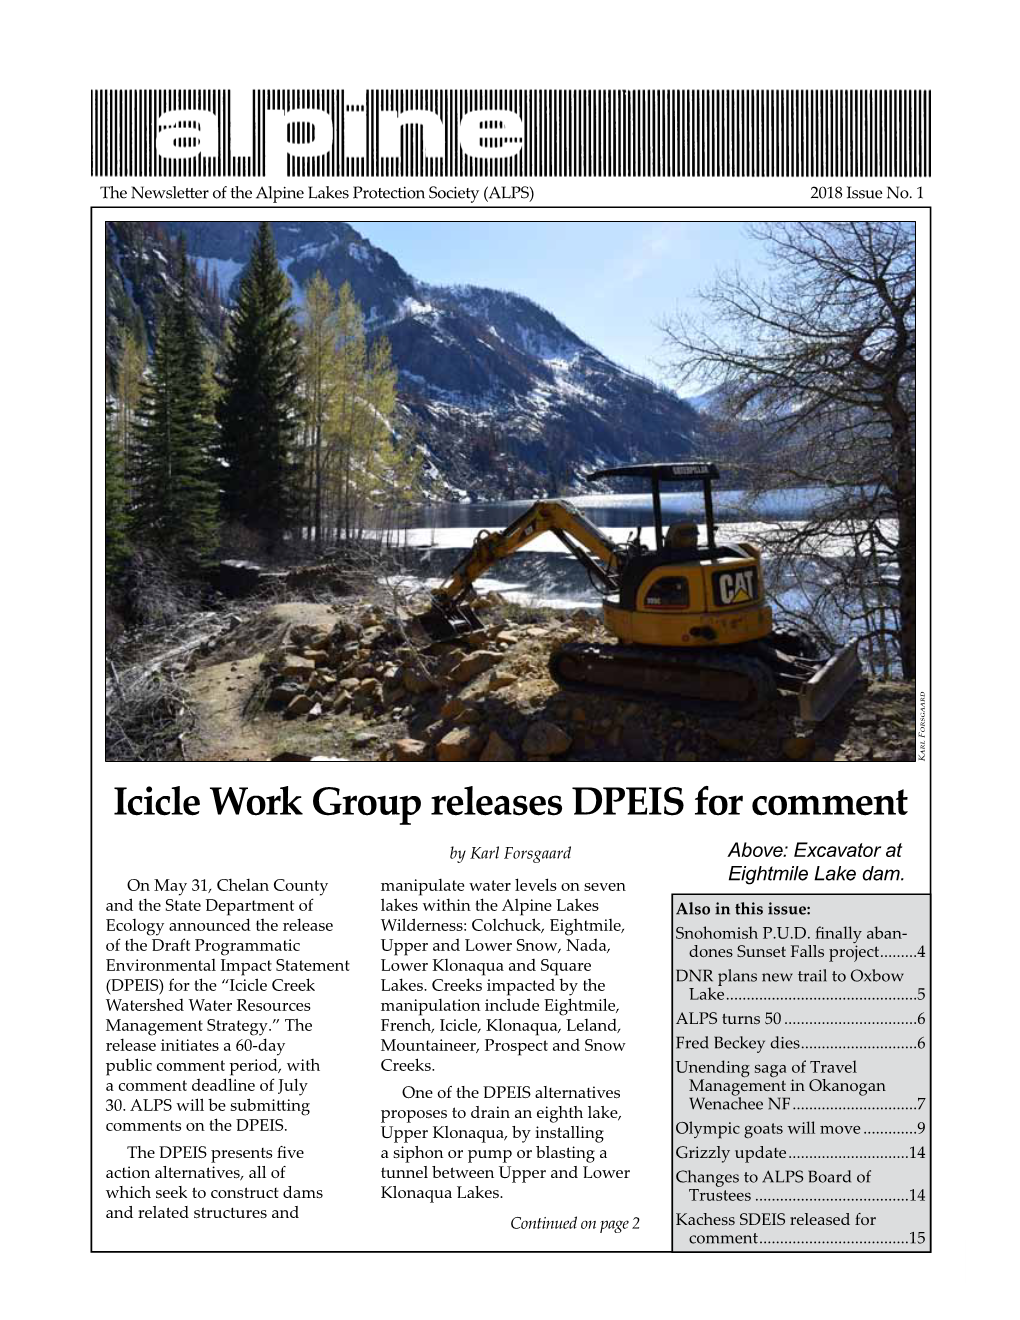 Icicle Work Group Releases DPEIS for Comment